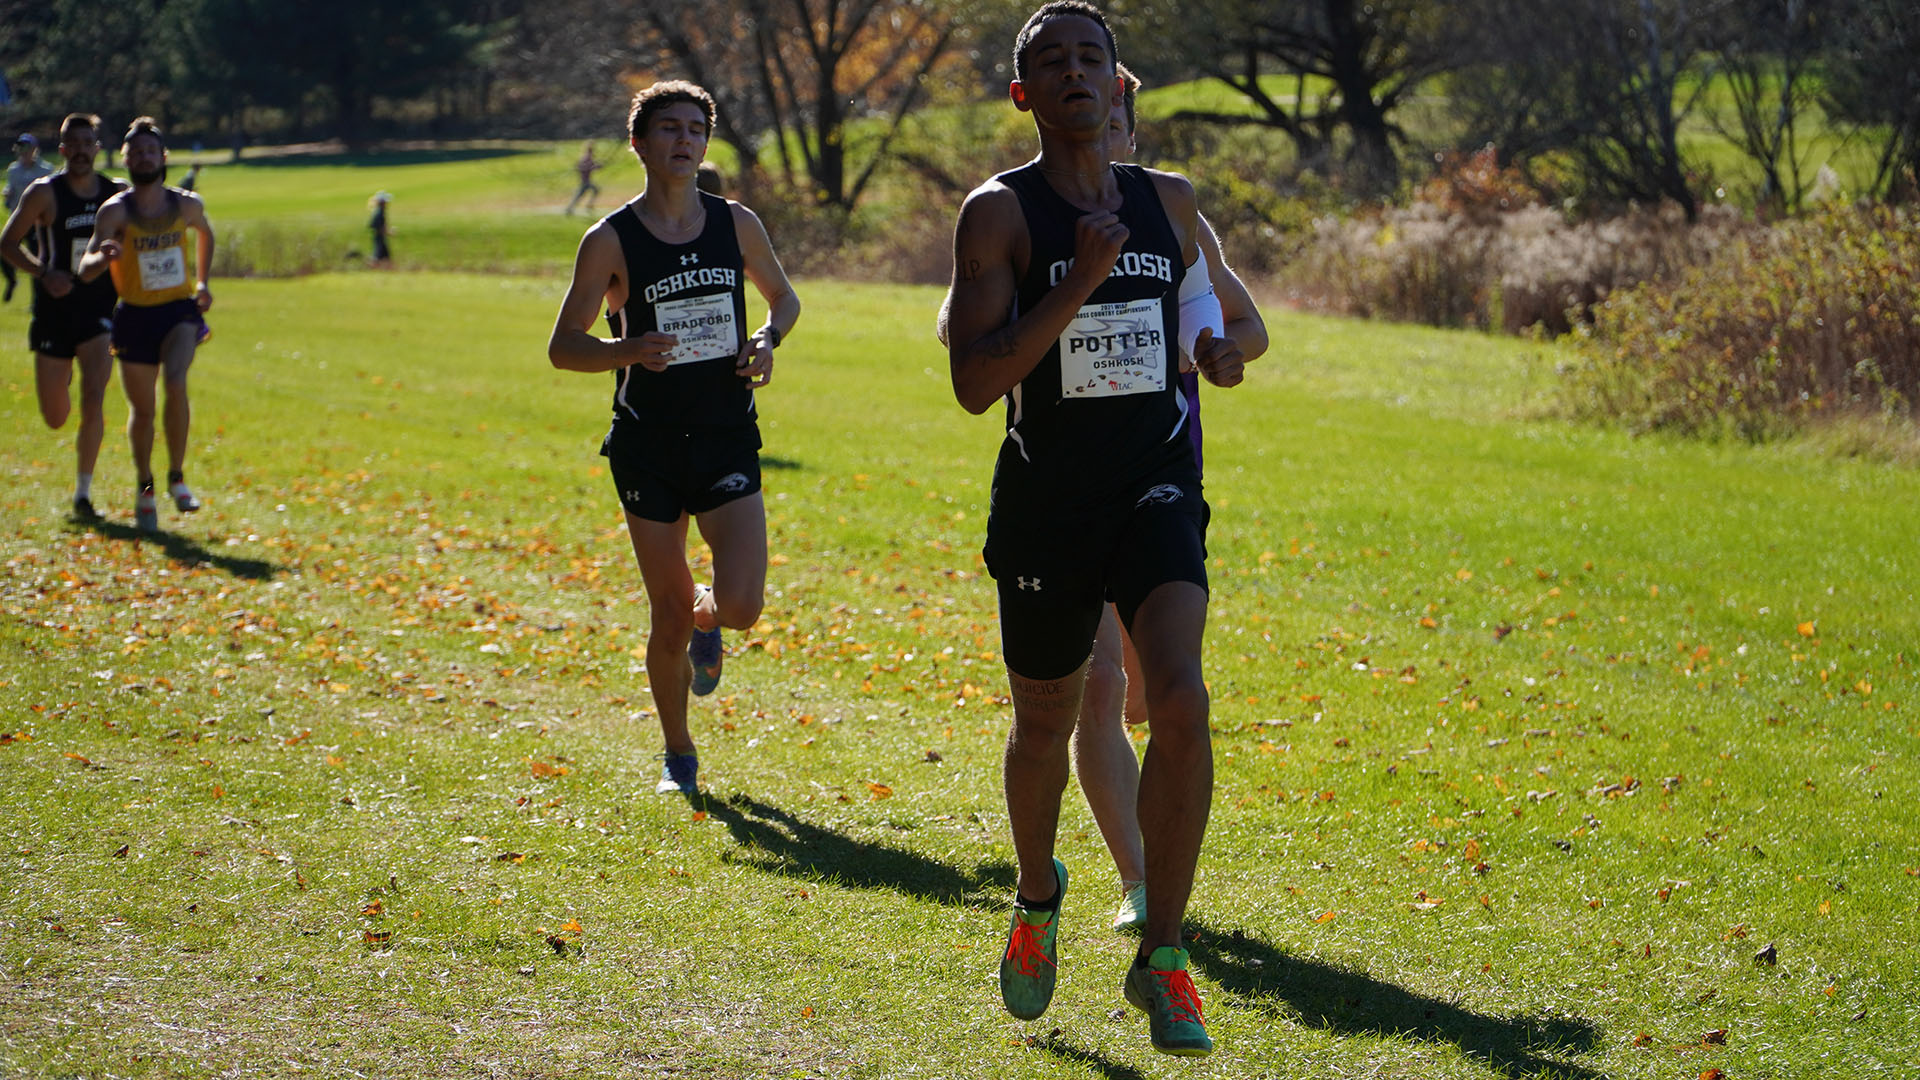 Steven Potter finished 11th and Mitchell Bradford 17th for the Titans at the WIAC Championship.